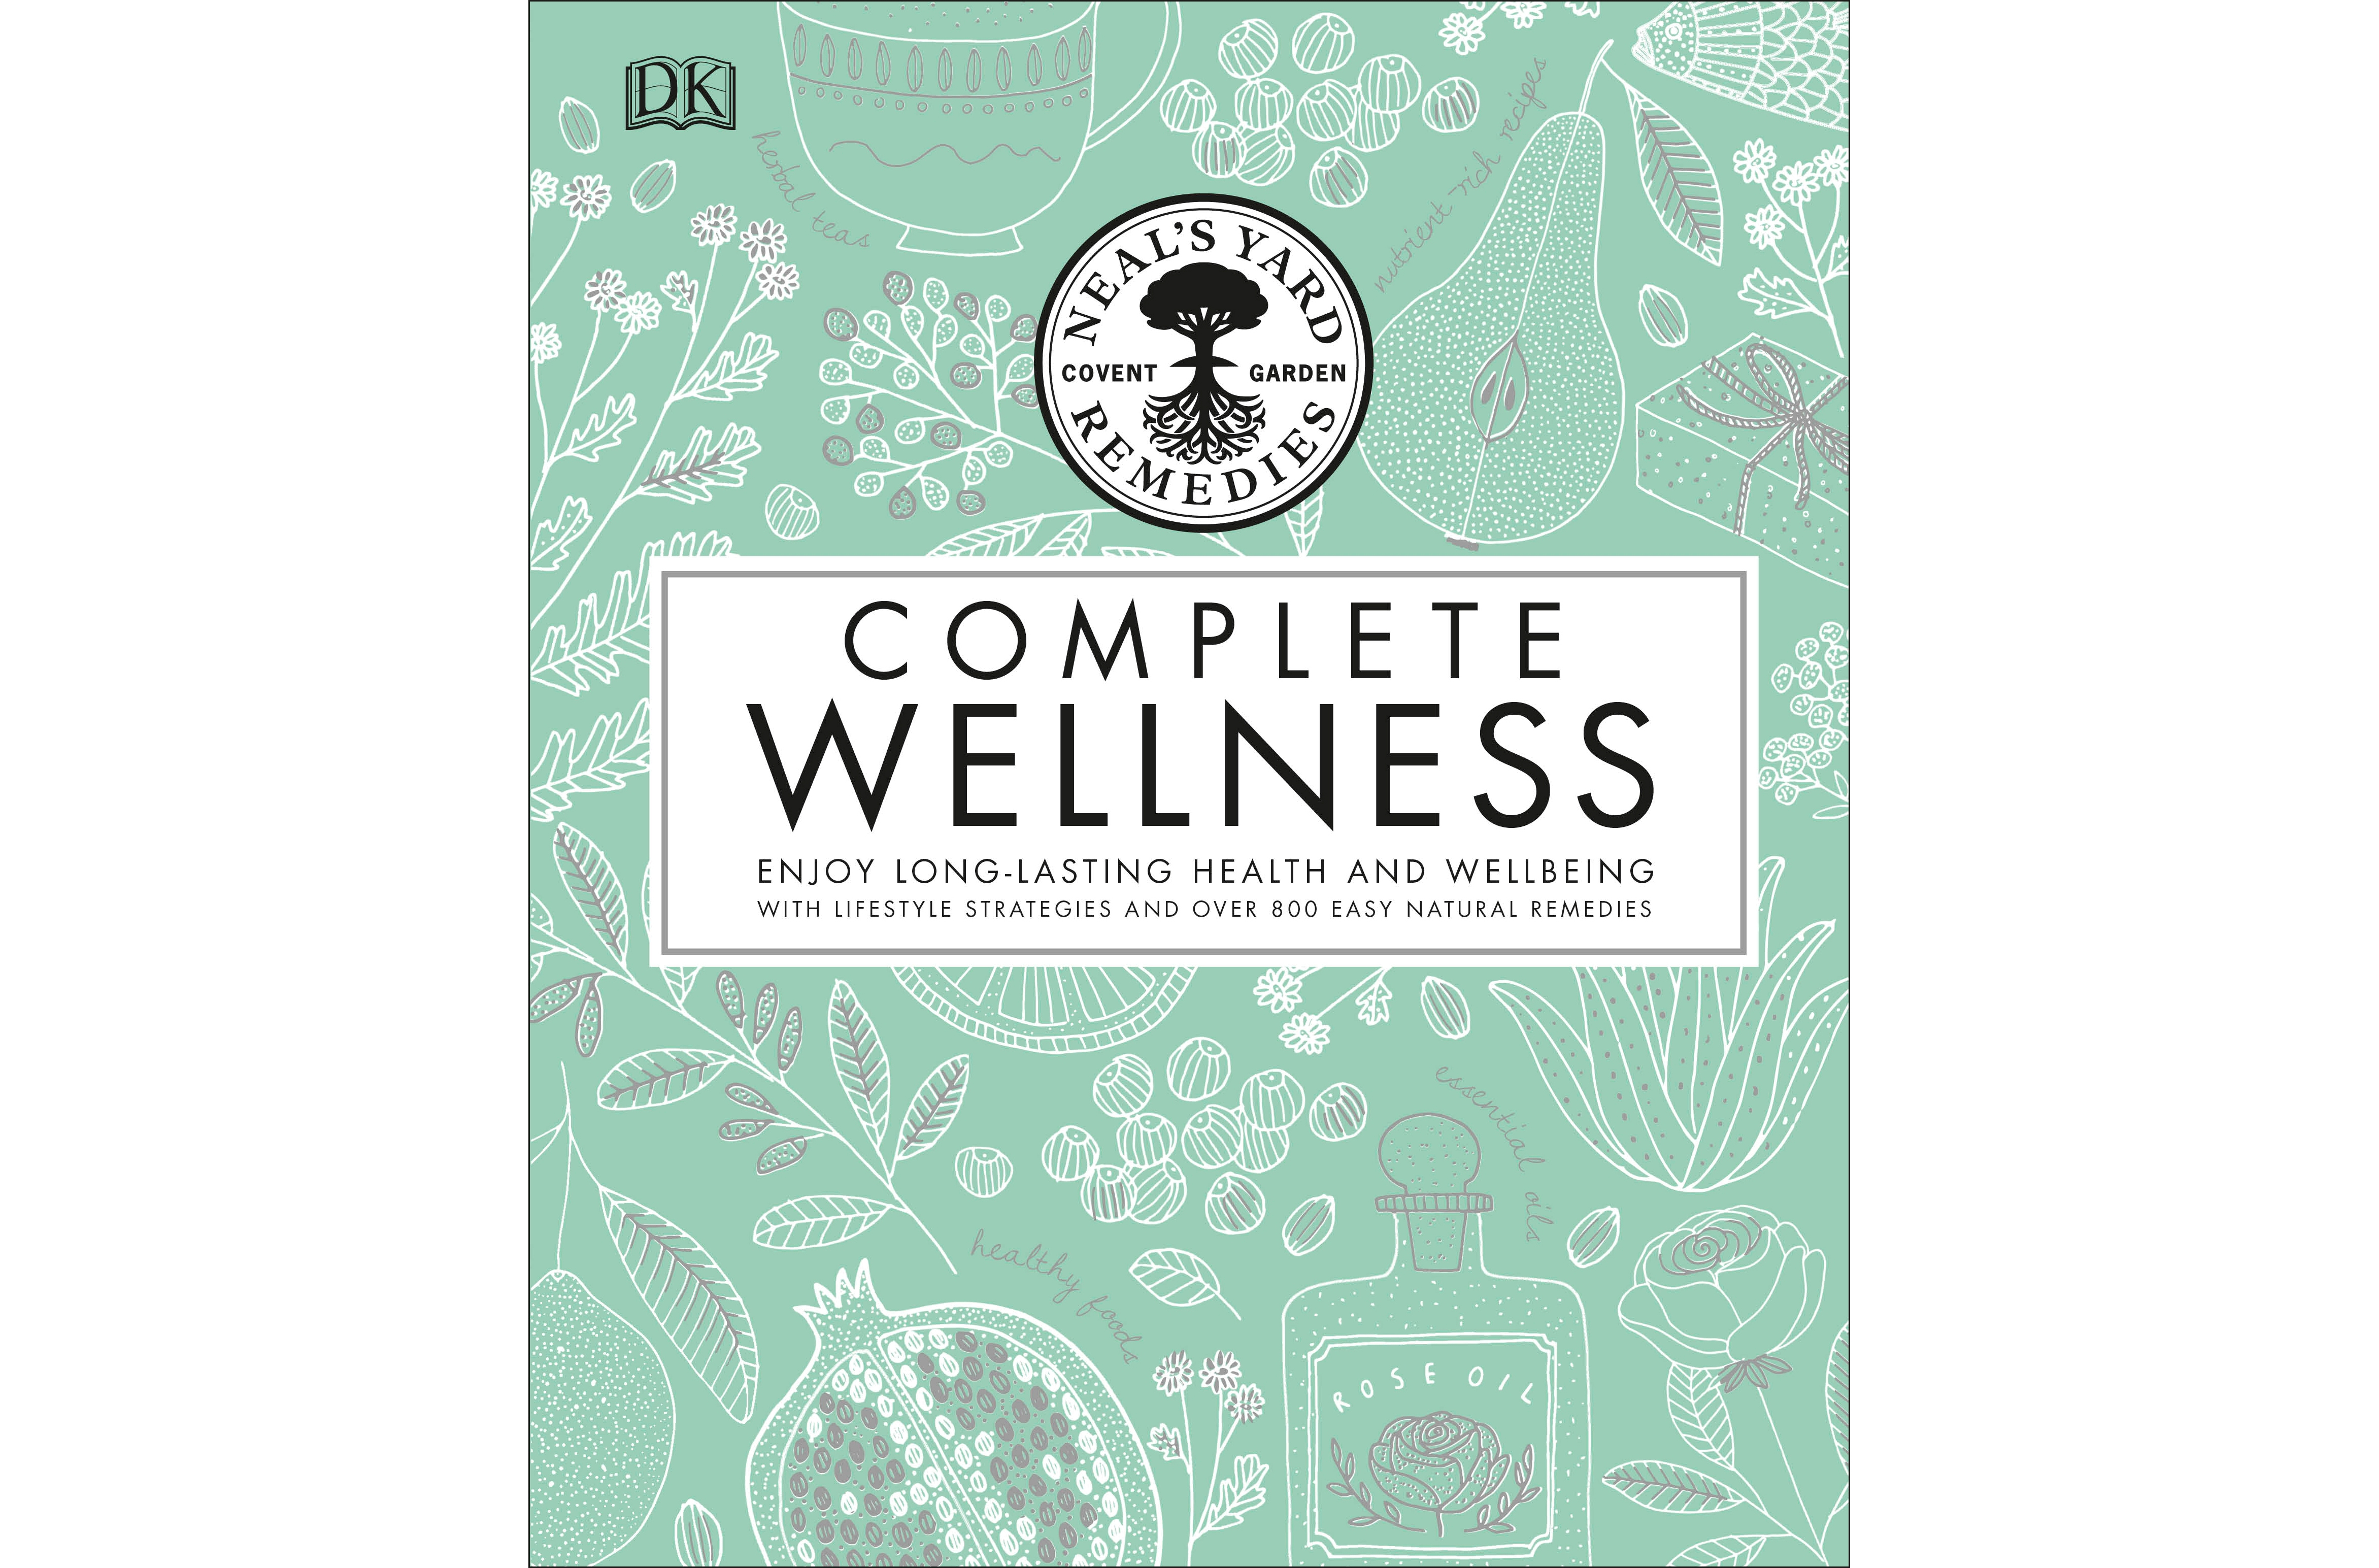 Neal's Yard Complete Wellness book cover 